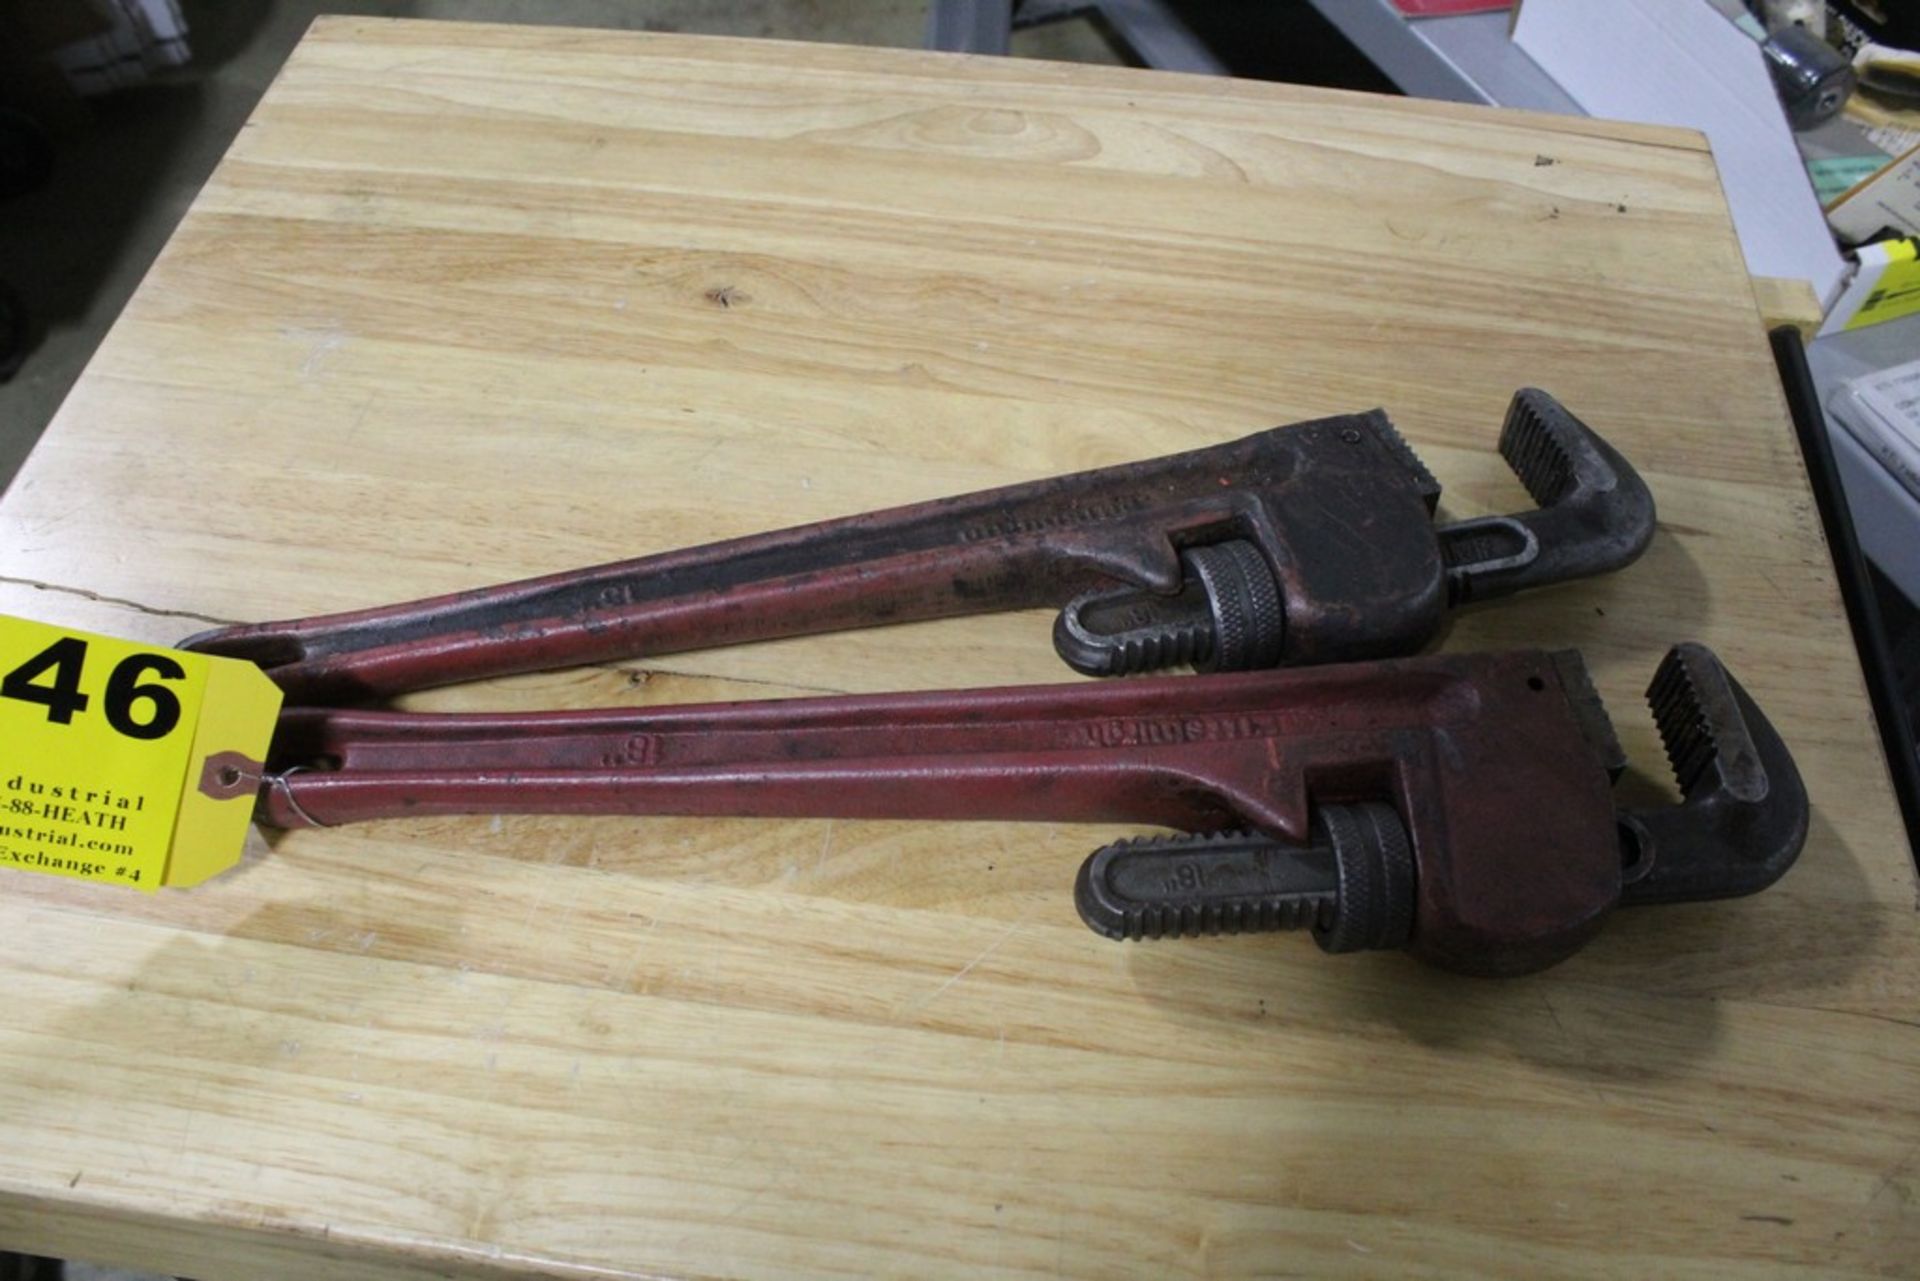 (2) PITTSBURGH 18" PIPE WRENCHES